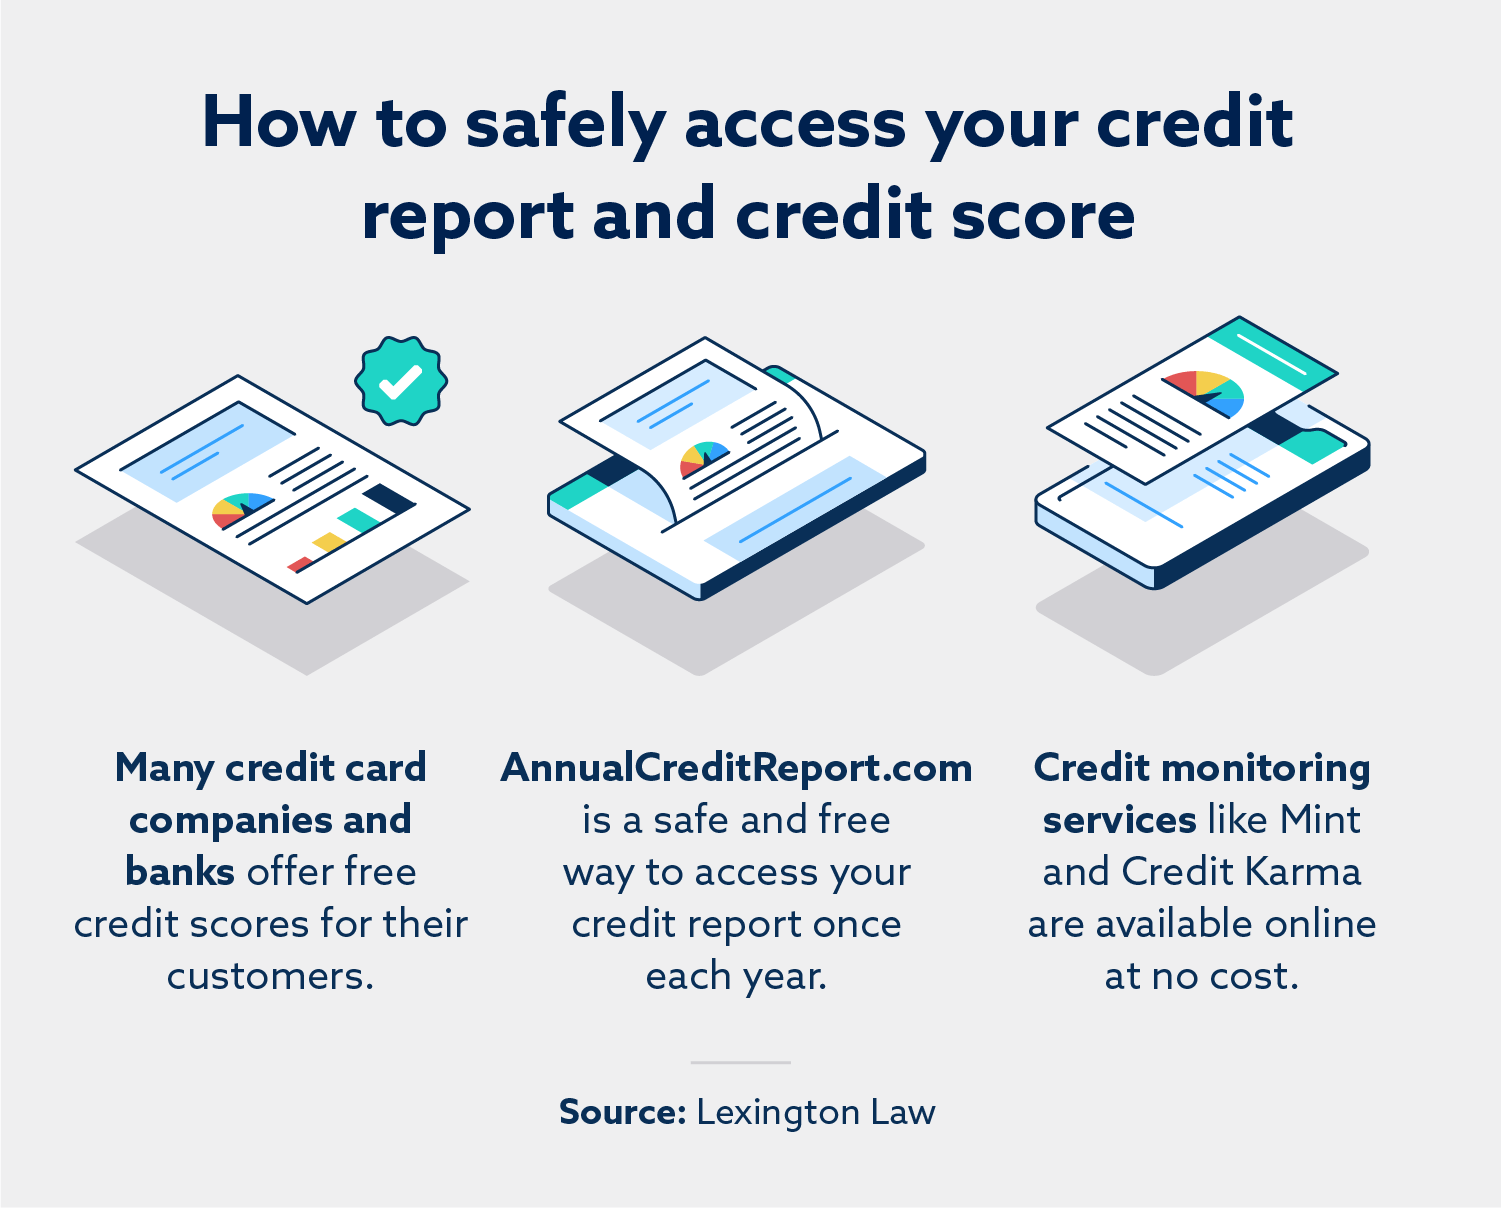 How to safely access your credit report and credit score.